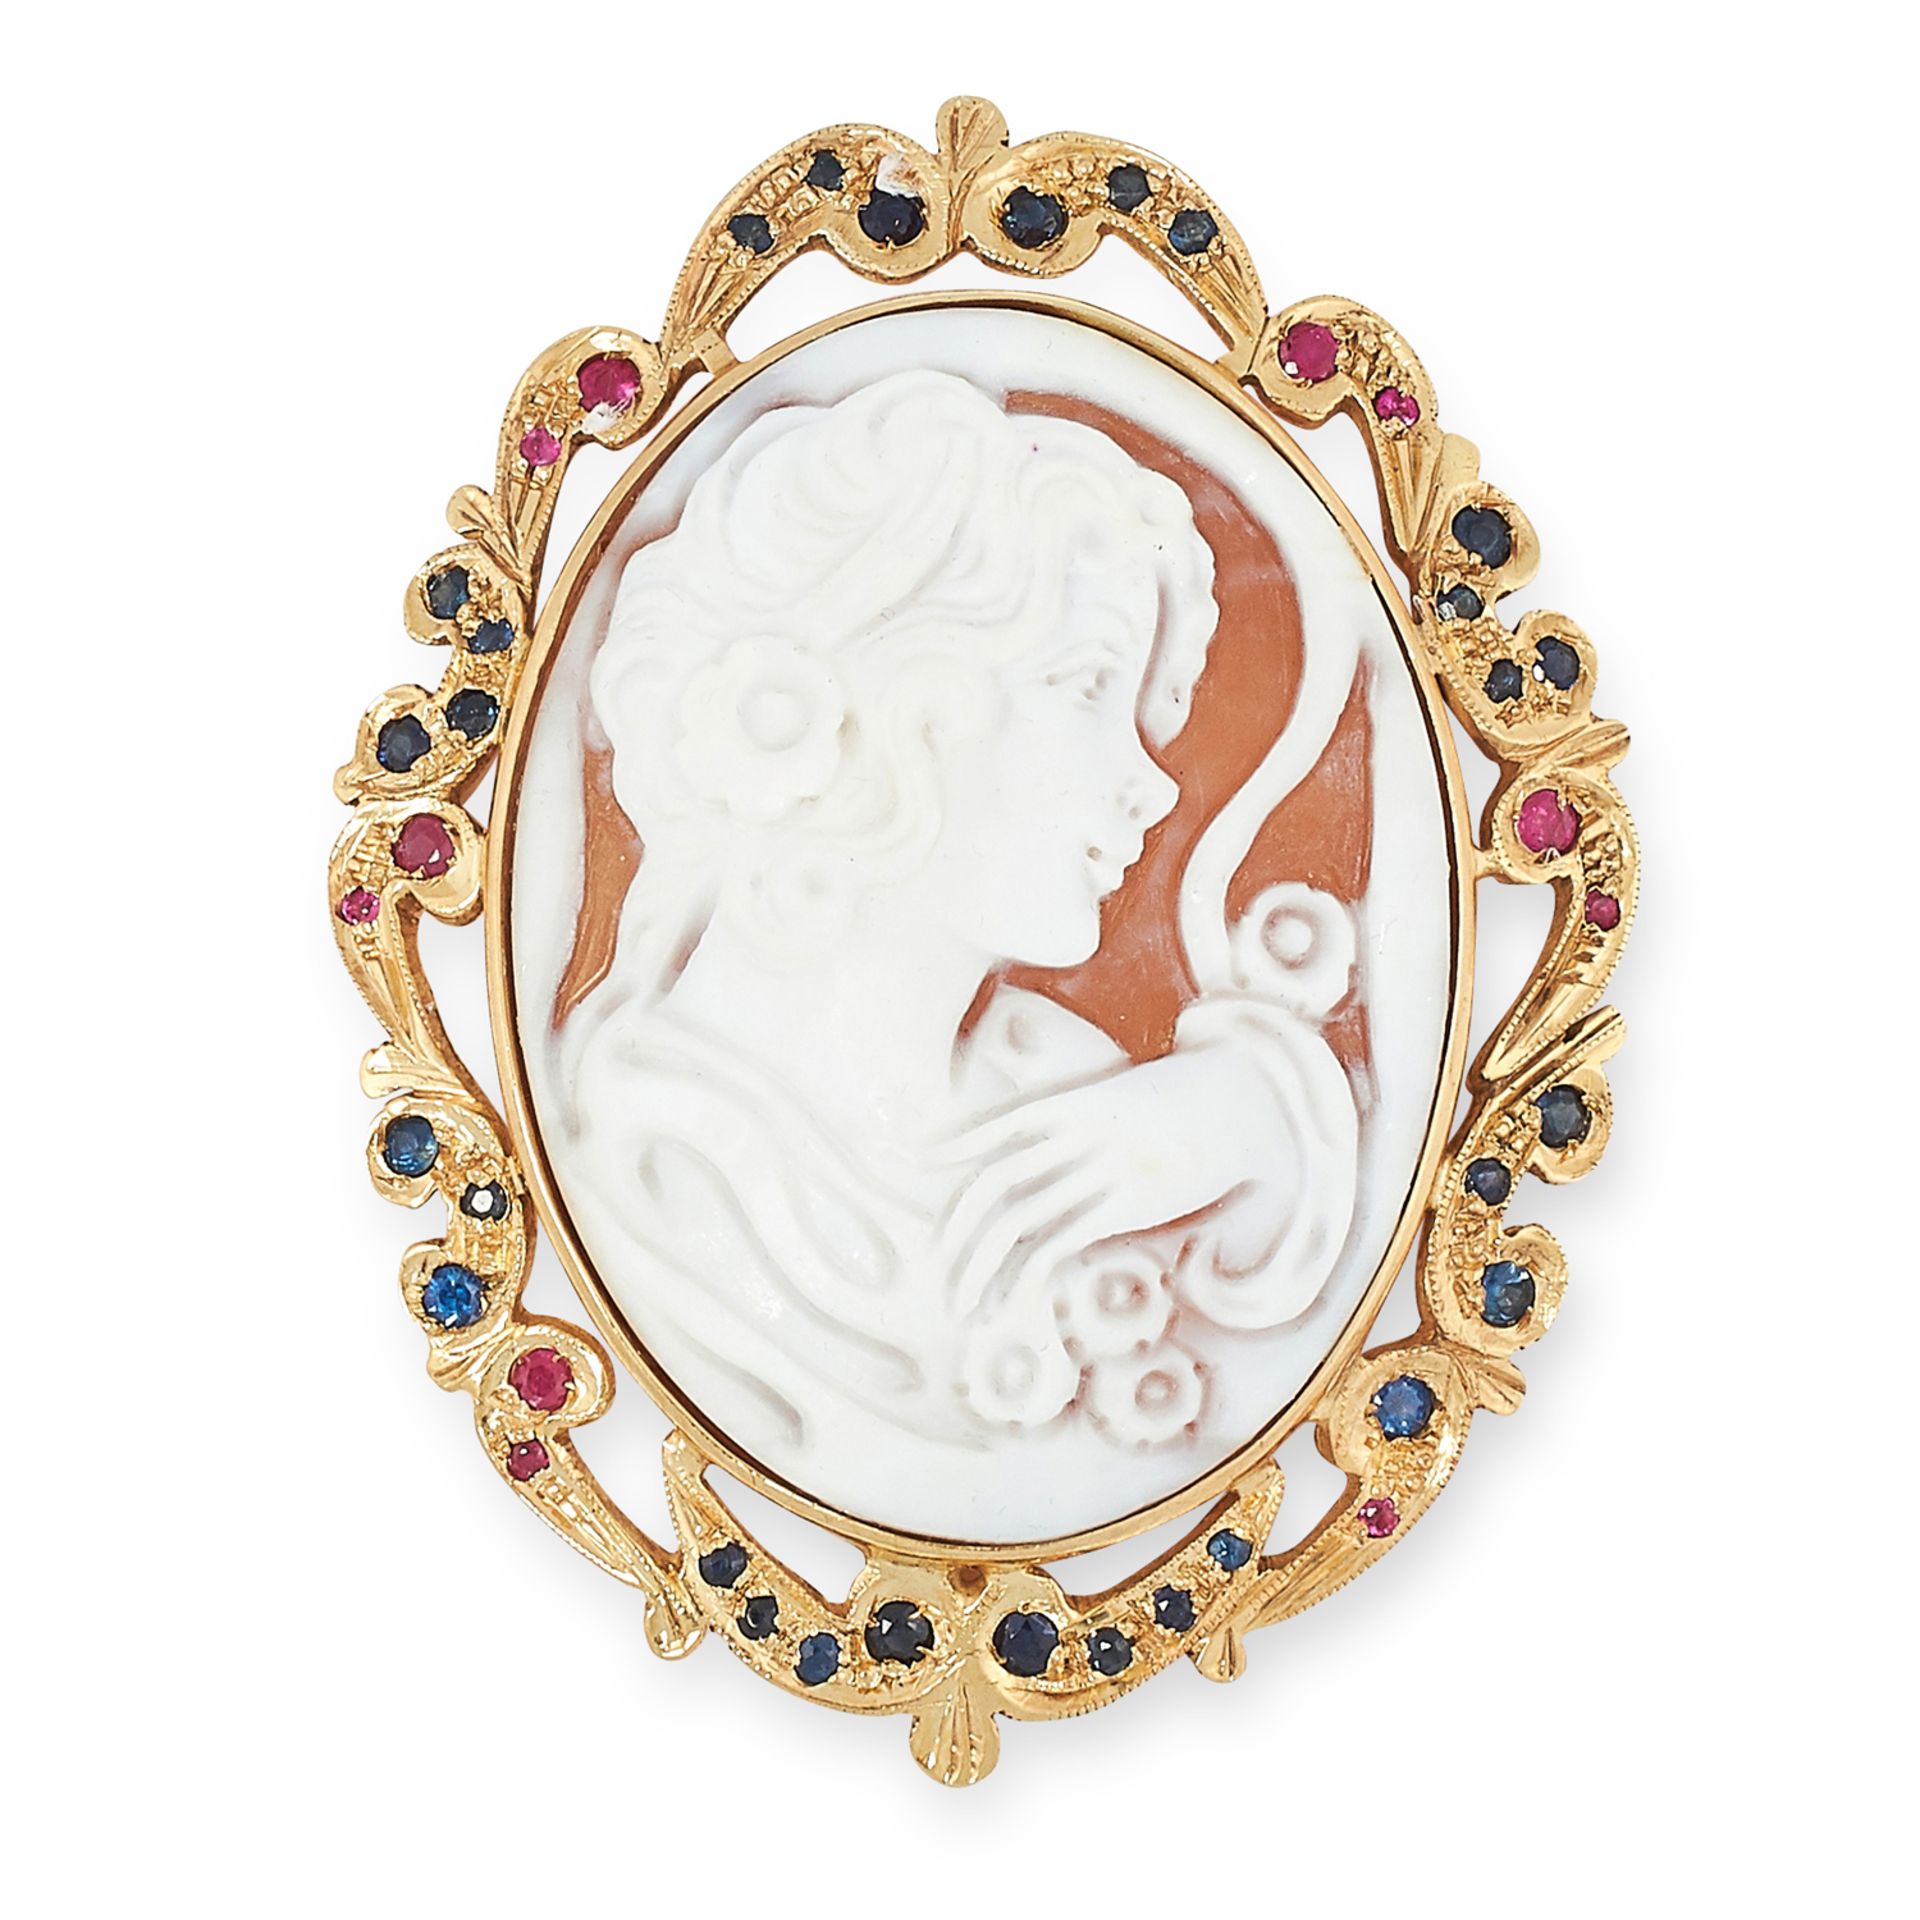 AN ANTIQUE SHELL CAMEO depicting a lady with flowers, in an ornate border set with round cut